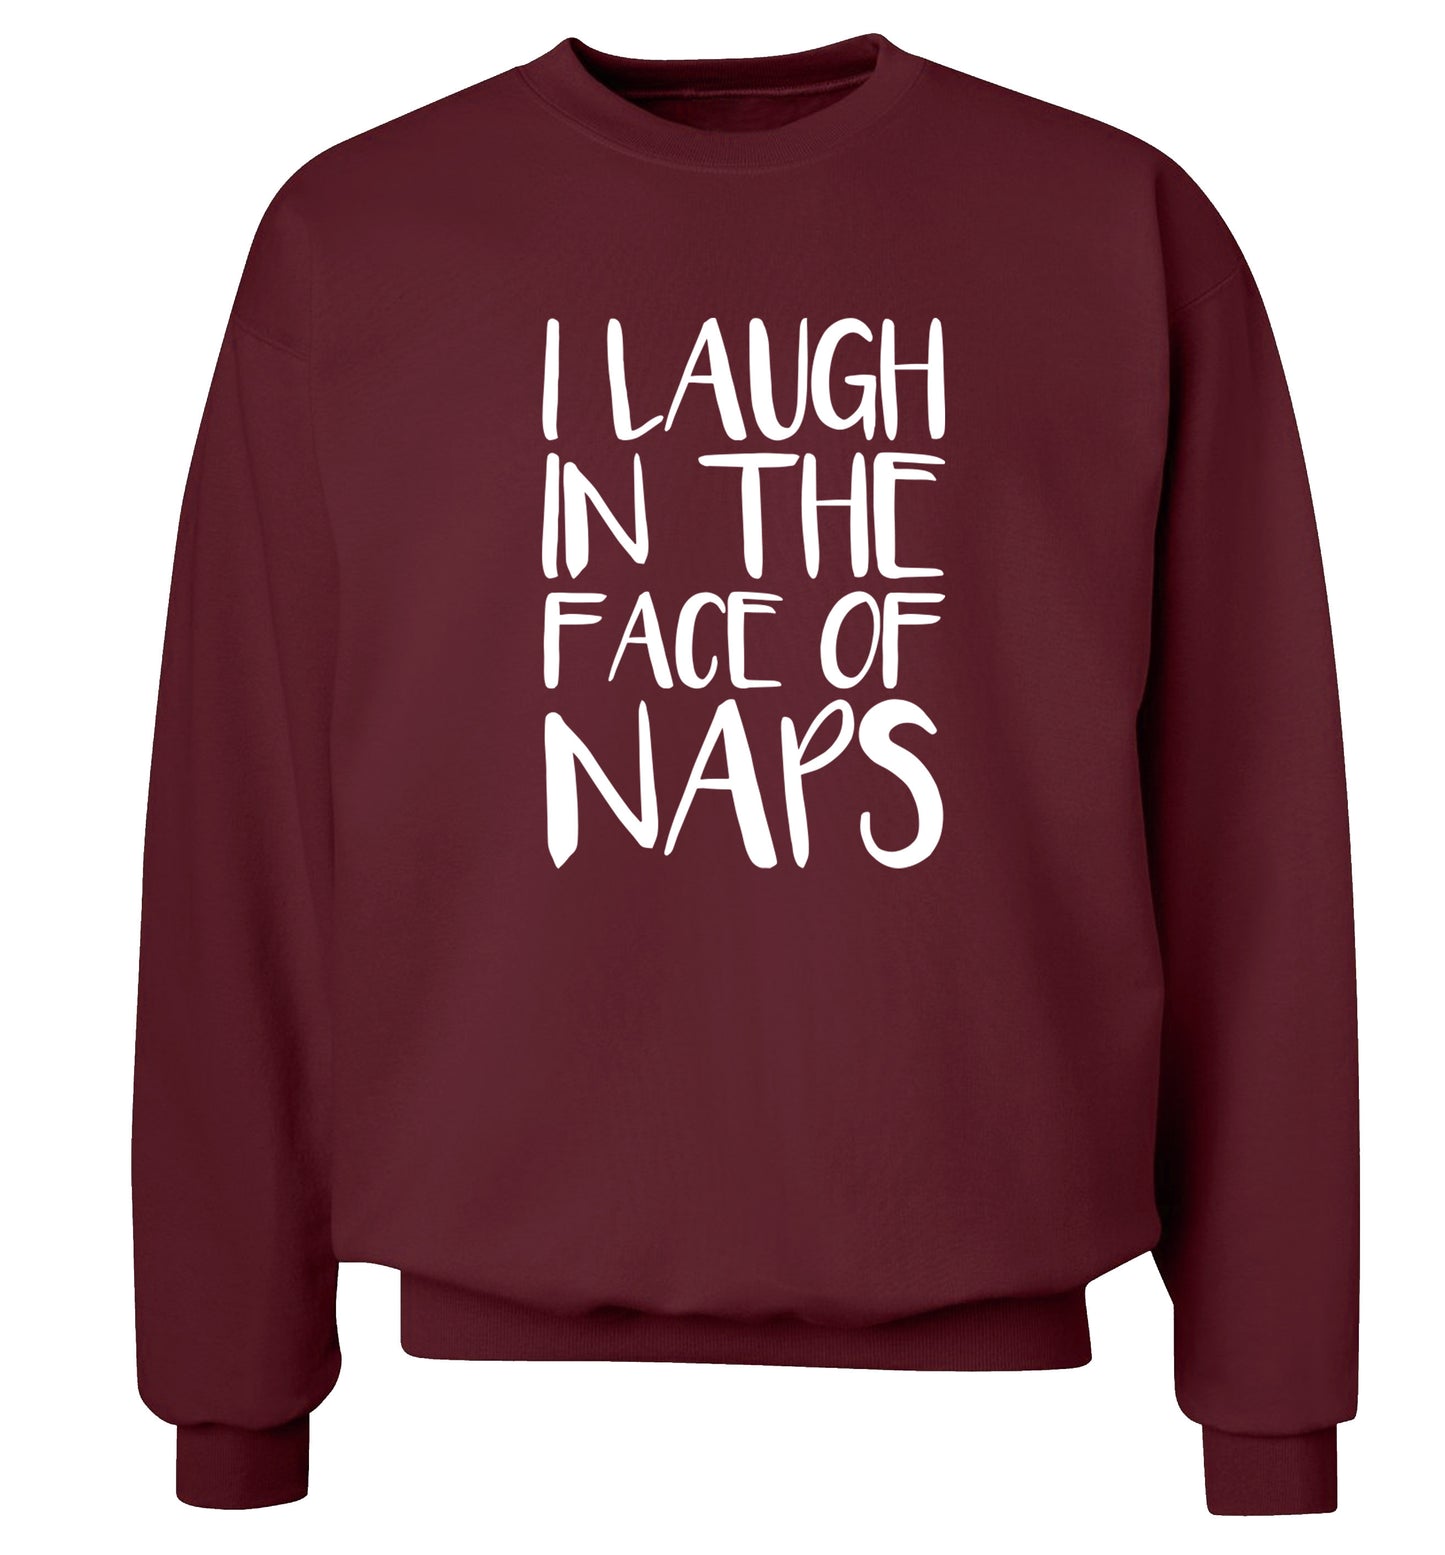 I laugh in the face of naps Adult's unisex maroon Sweater 2XL